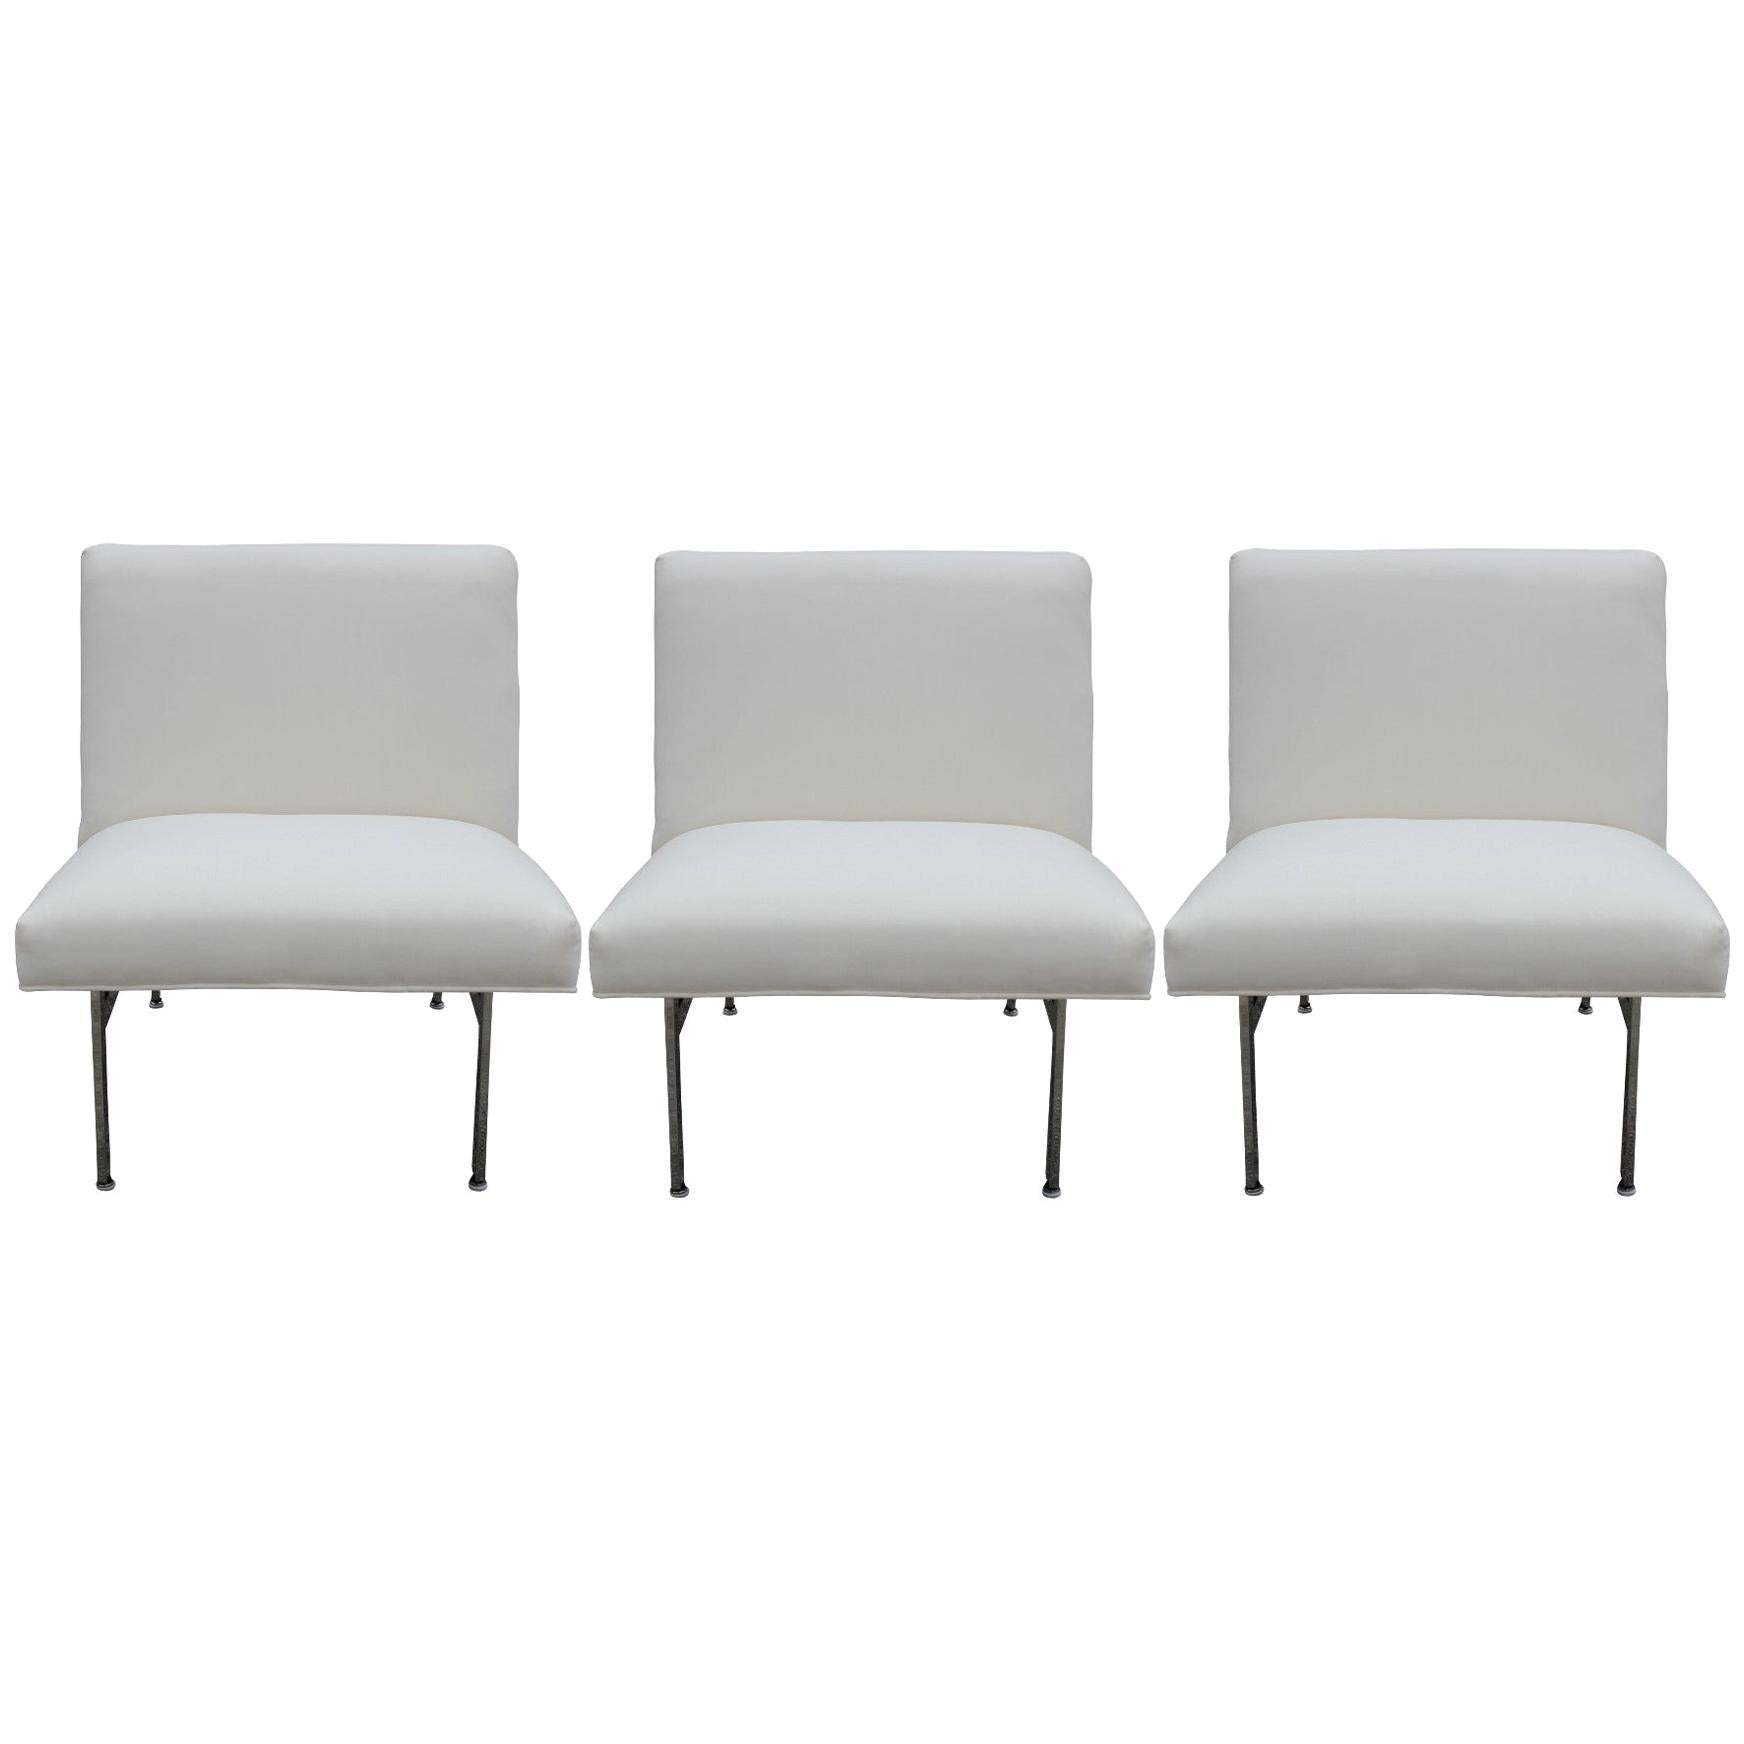 Set of Three Parallel Bar White Velvet with Chrome Feet Chairs Designed by Knoll